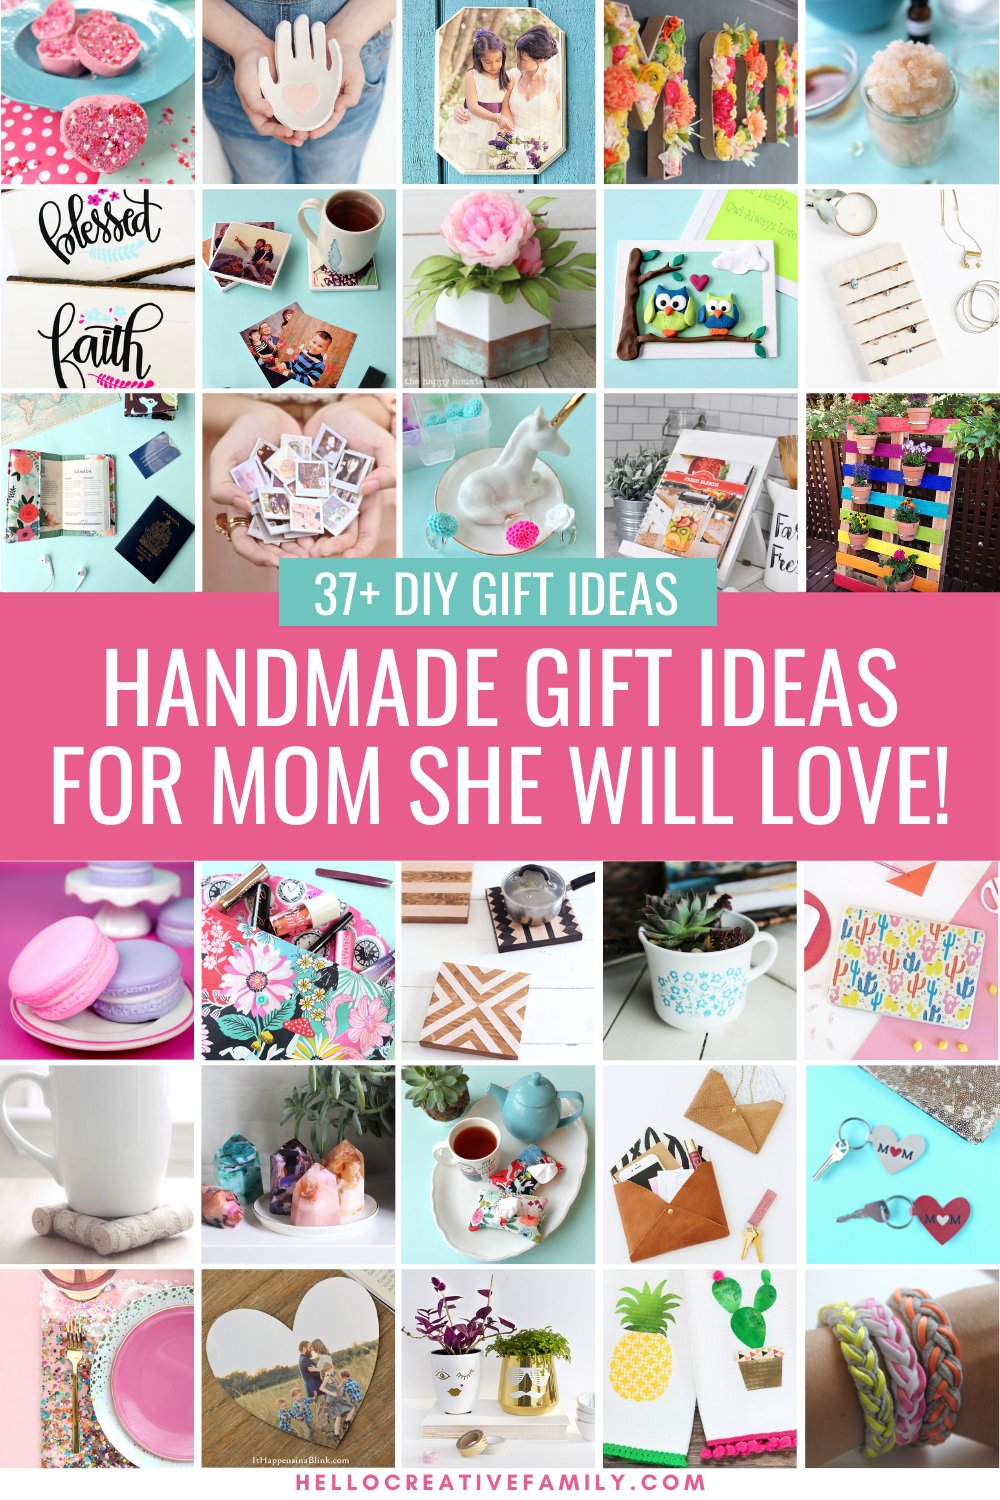 Whether you're looking handmade gift ideas for mom for Mother's Day, birthdays, Valentine's Day, Christmas or a "just because" gift, we've got you covered with over 37 handmade gift ideas women are sure to love! We are going to help you make the perfect gift for Mom! So pull out those DIY supplies, head into your craft room and get creating! Your mama will thank you! 